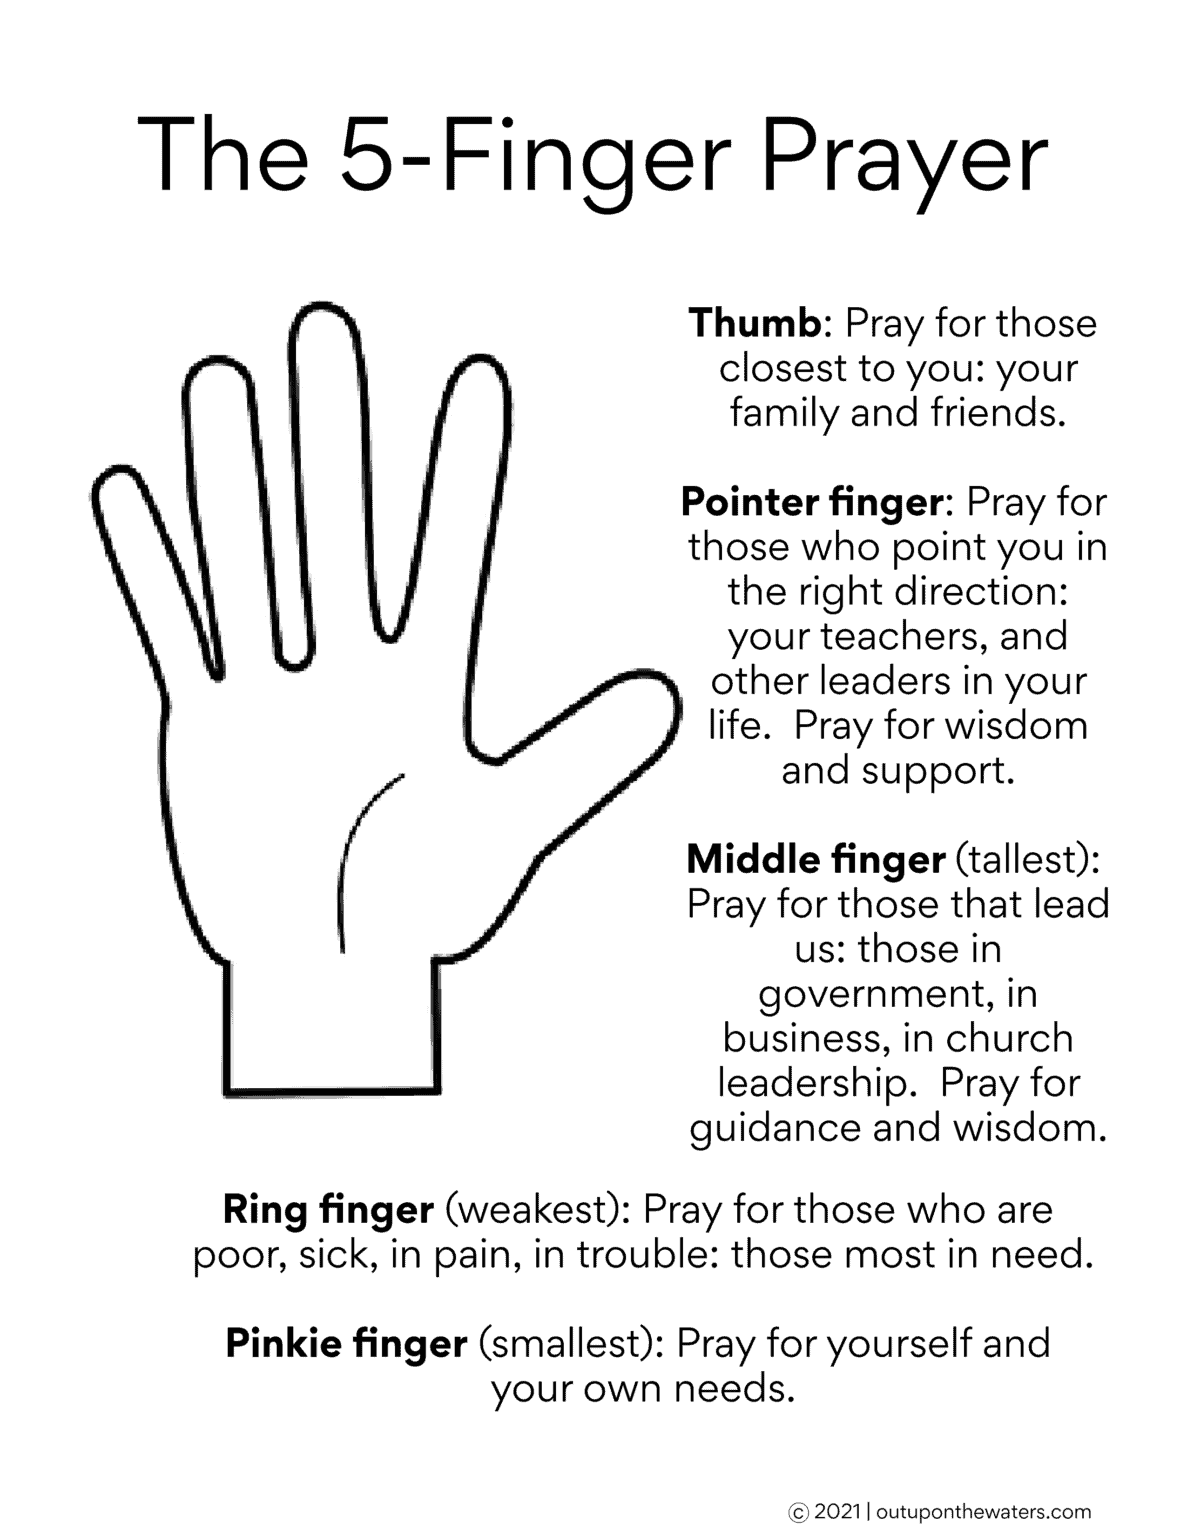 how-to-pray-the-5-finger-prayer-free-printable-out-upon-the-waters